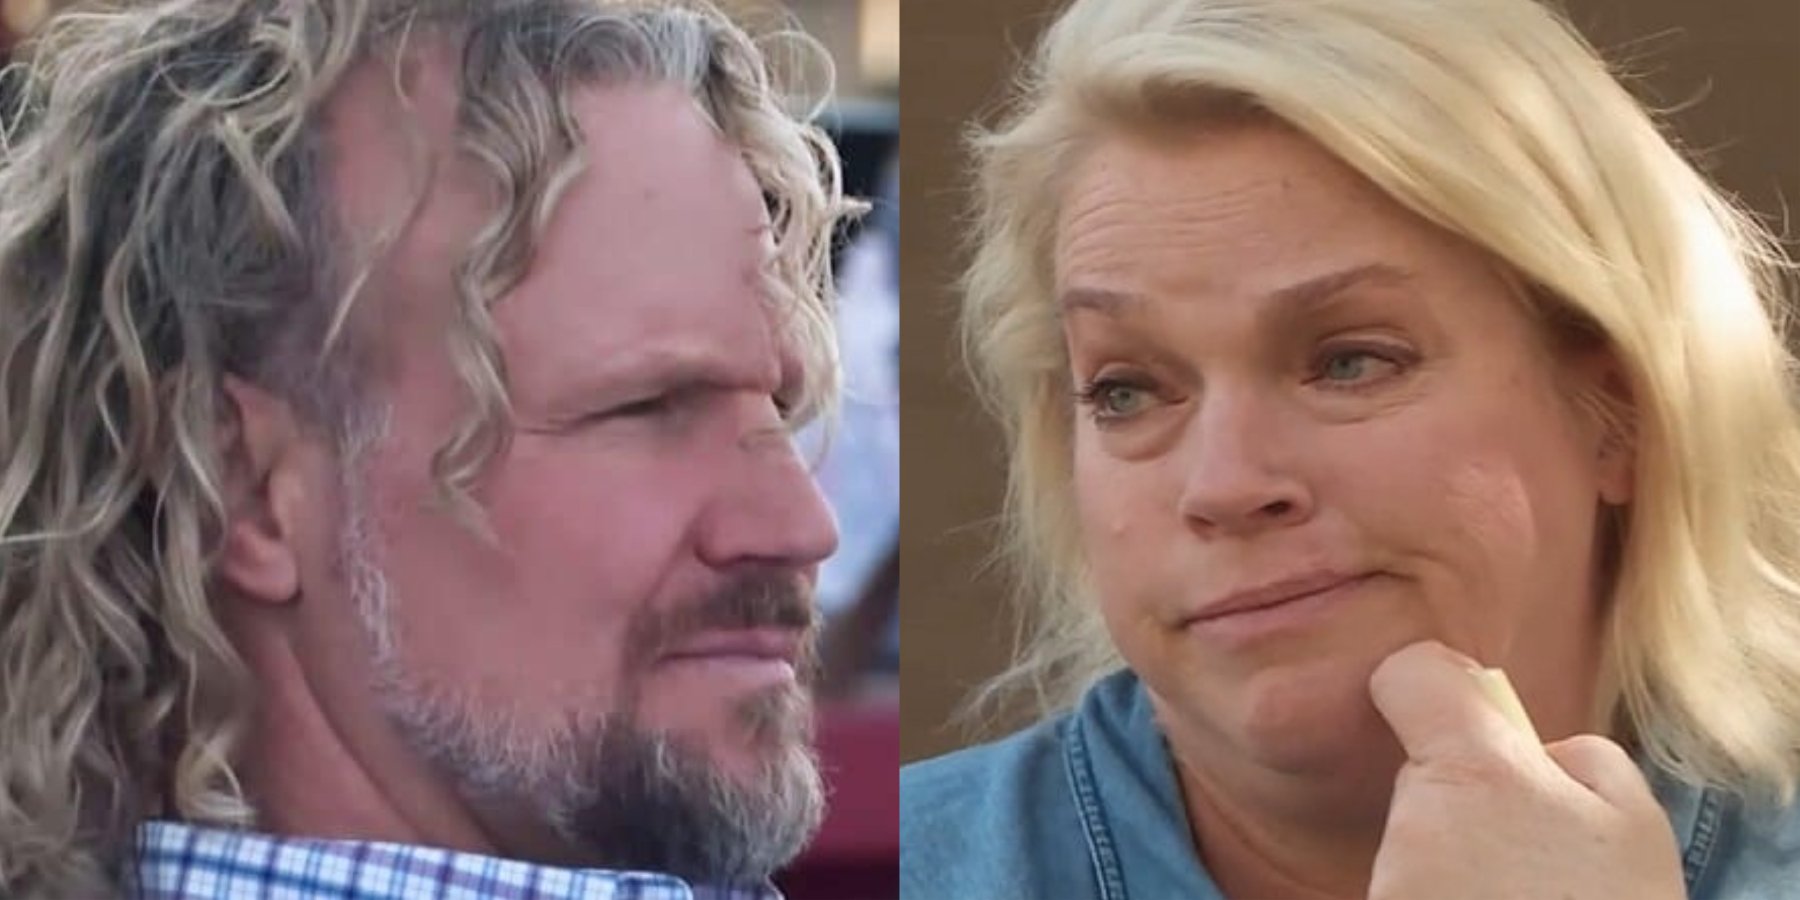 Kody and Janelle Brown in separate screenshots taken during an episode of TLC's 'Sister Wives.'